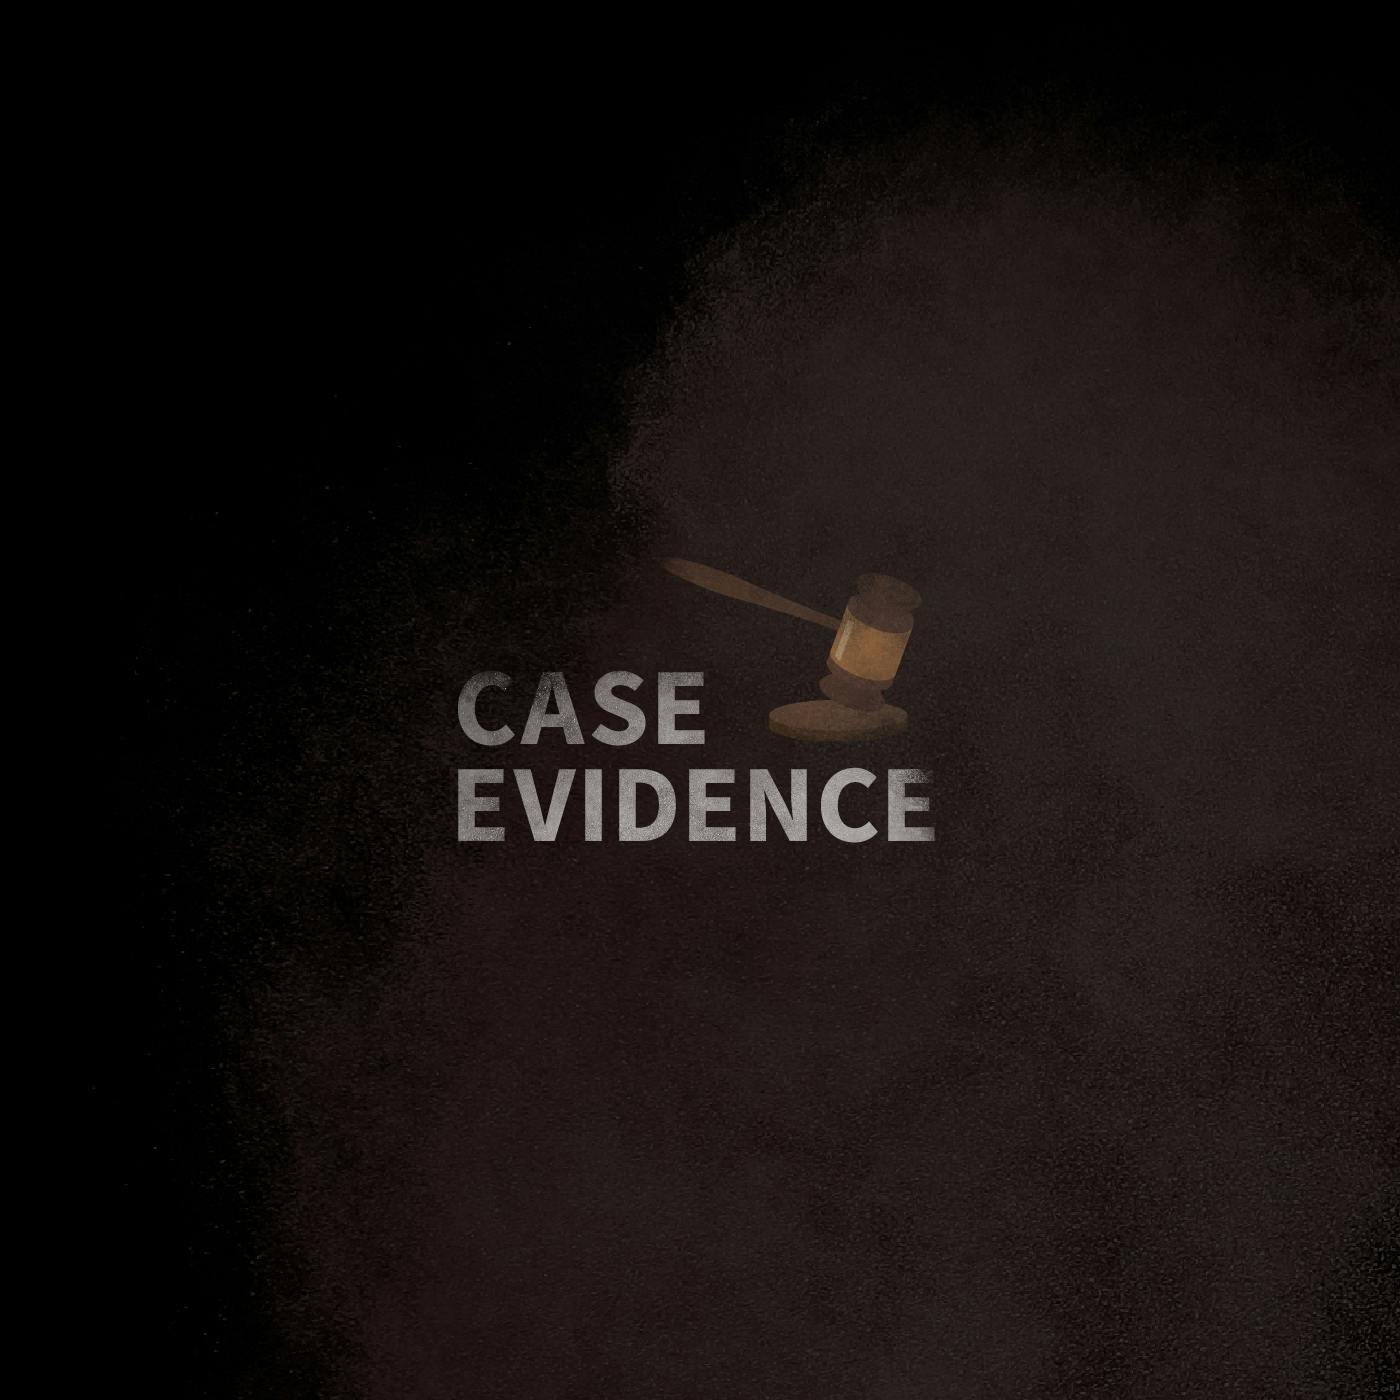 Case Evidence 04.17.17 by Tenderfoot TV